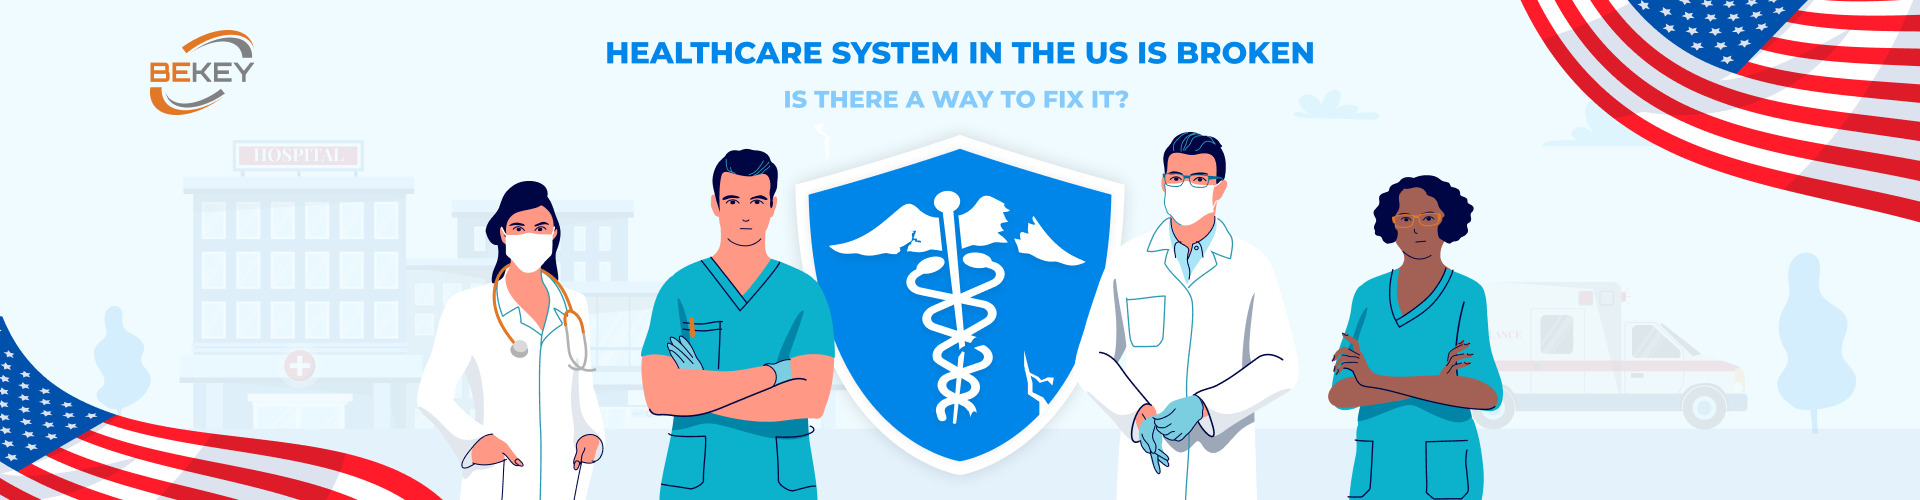 Healthcare System in the US is Broken. Is There a Way to Fix It?